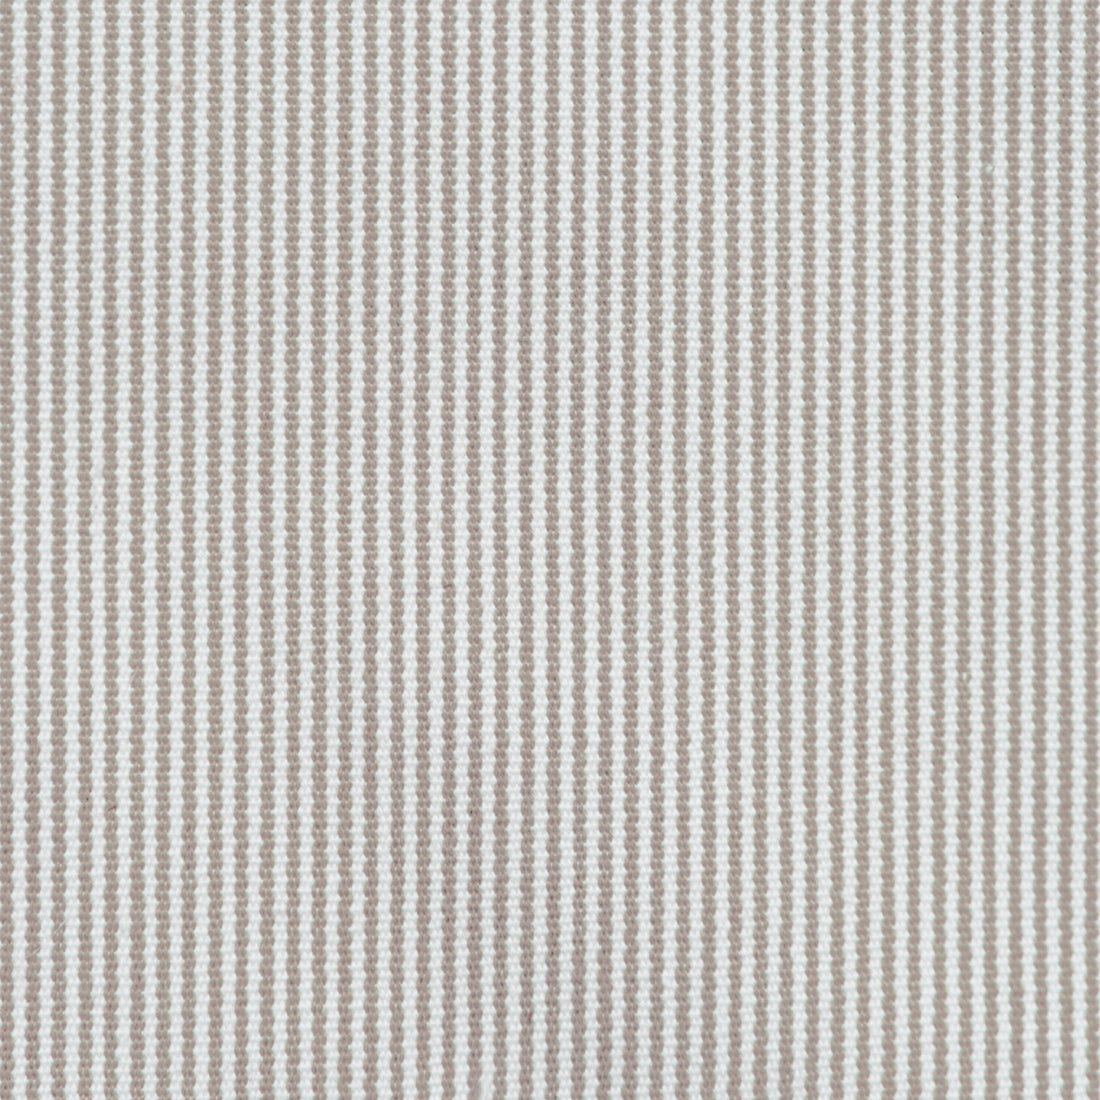 Talaiot fabric in beige/blanco color - pattern GDT5672.004.0 - by Gaston y Daniela in the Gaston Maiorica collection